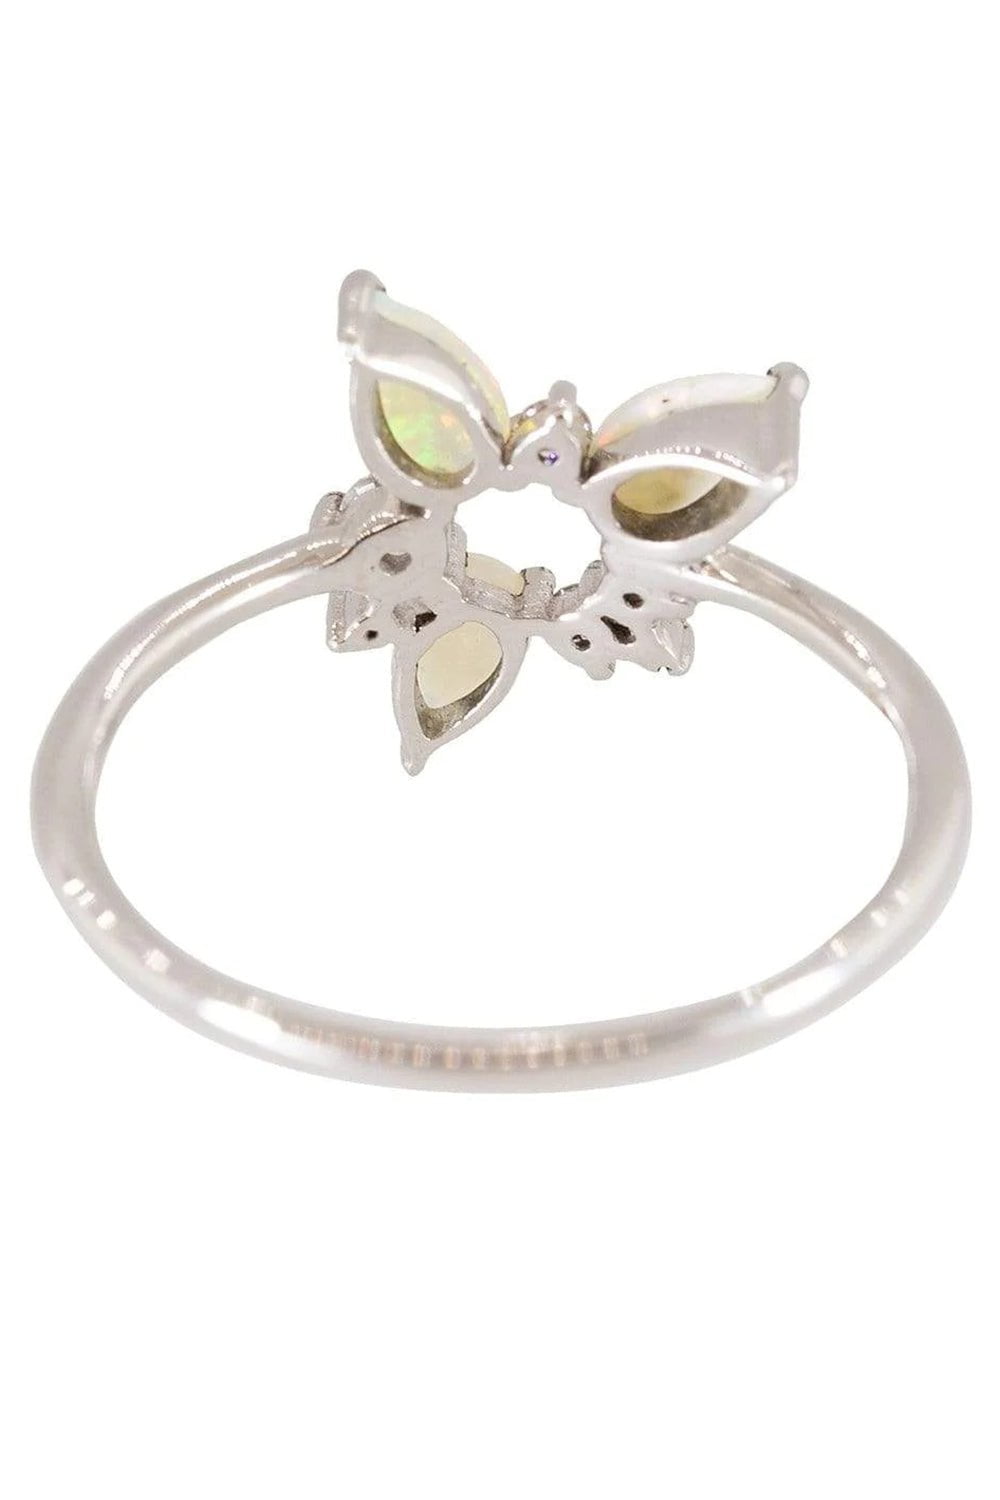 FERNANDO JORGE-Opal and Diamond Electric Spark Ring-WHITE GOLD